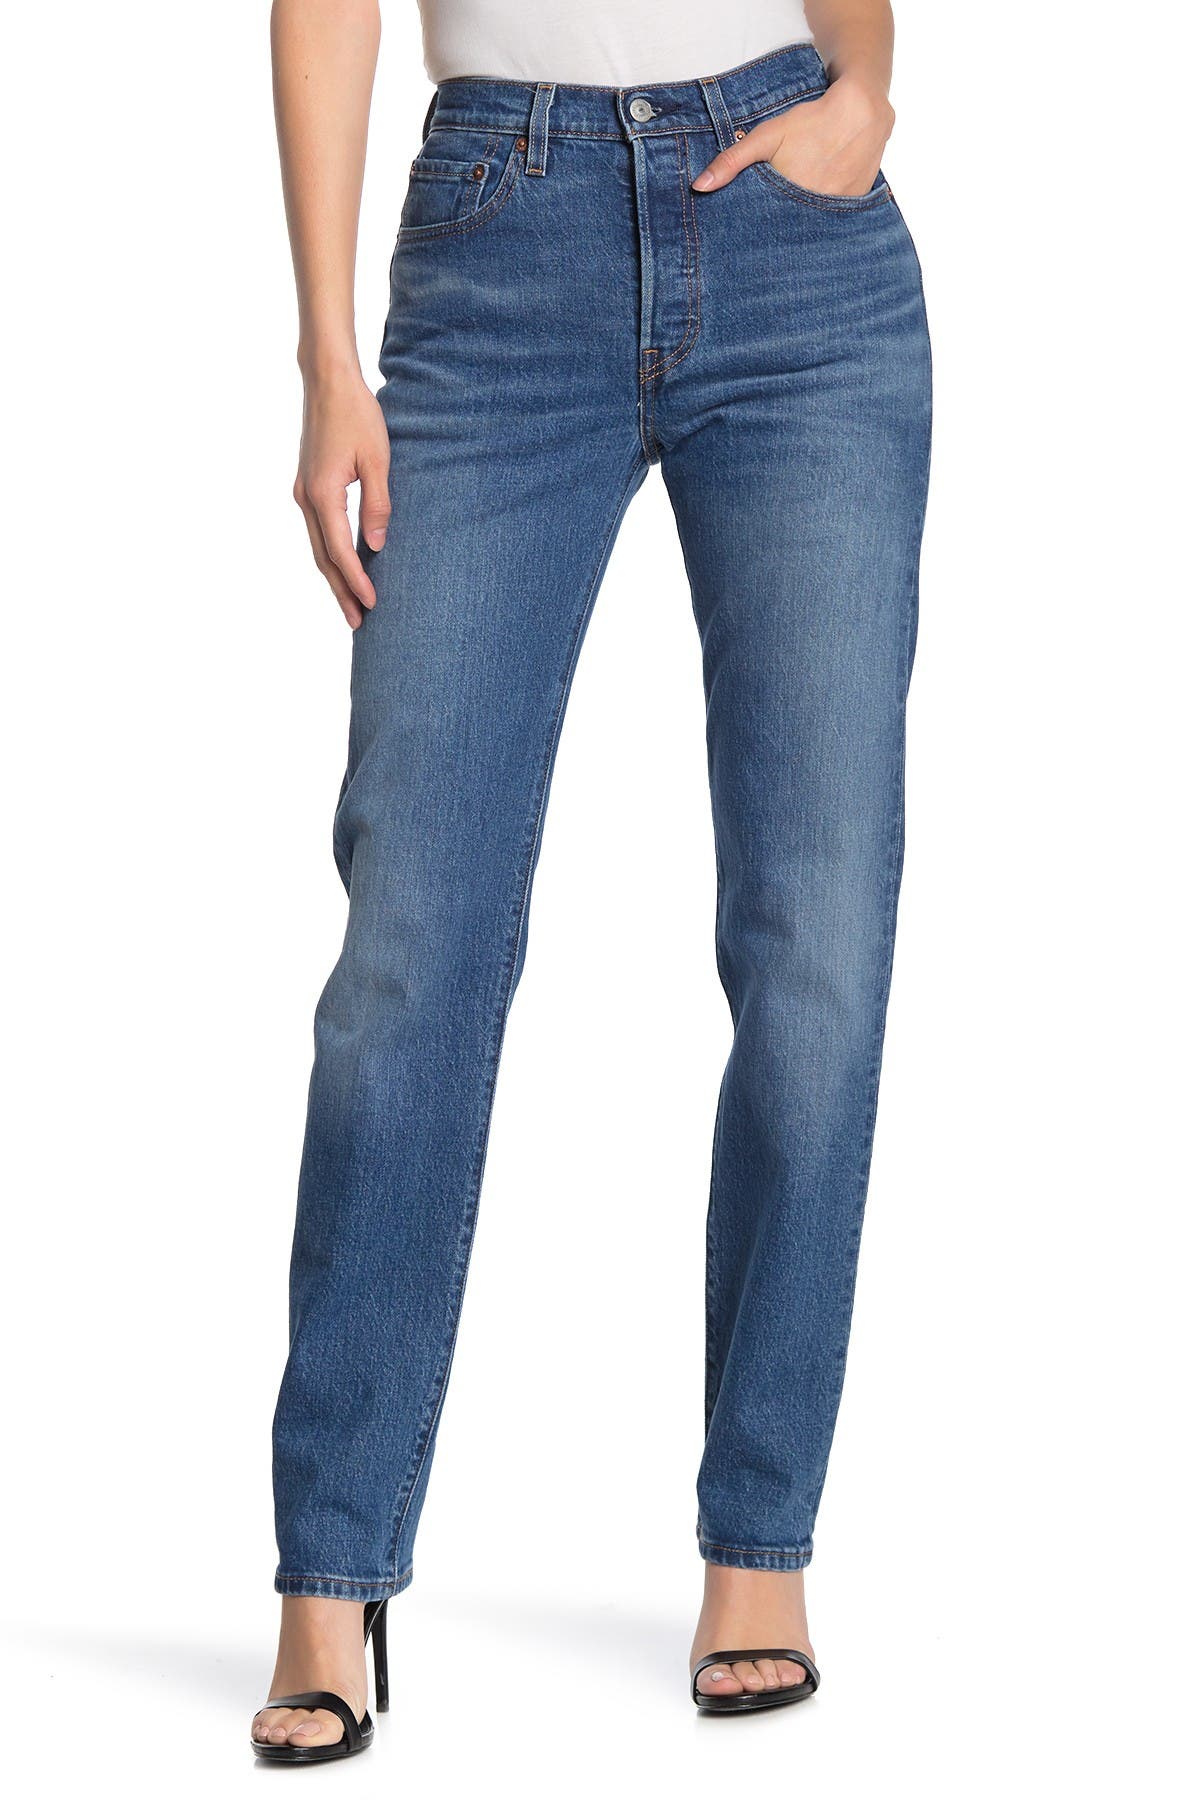 Levi's | 501 High Rise Jeans 